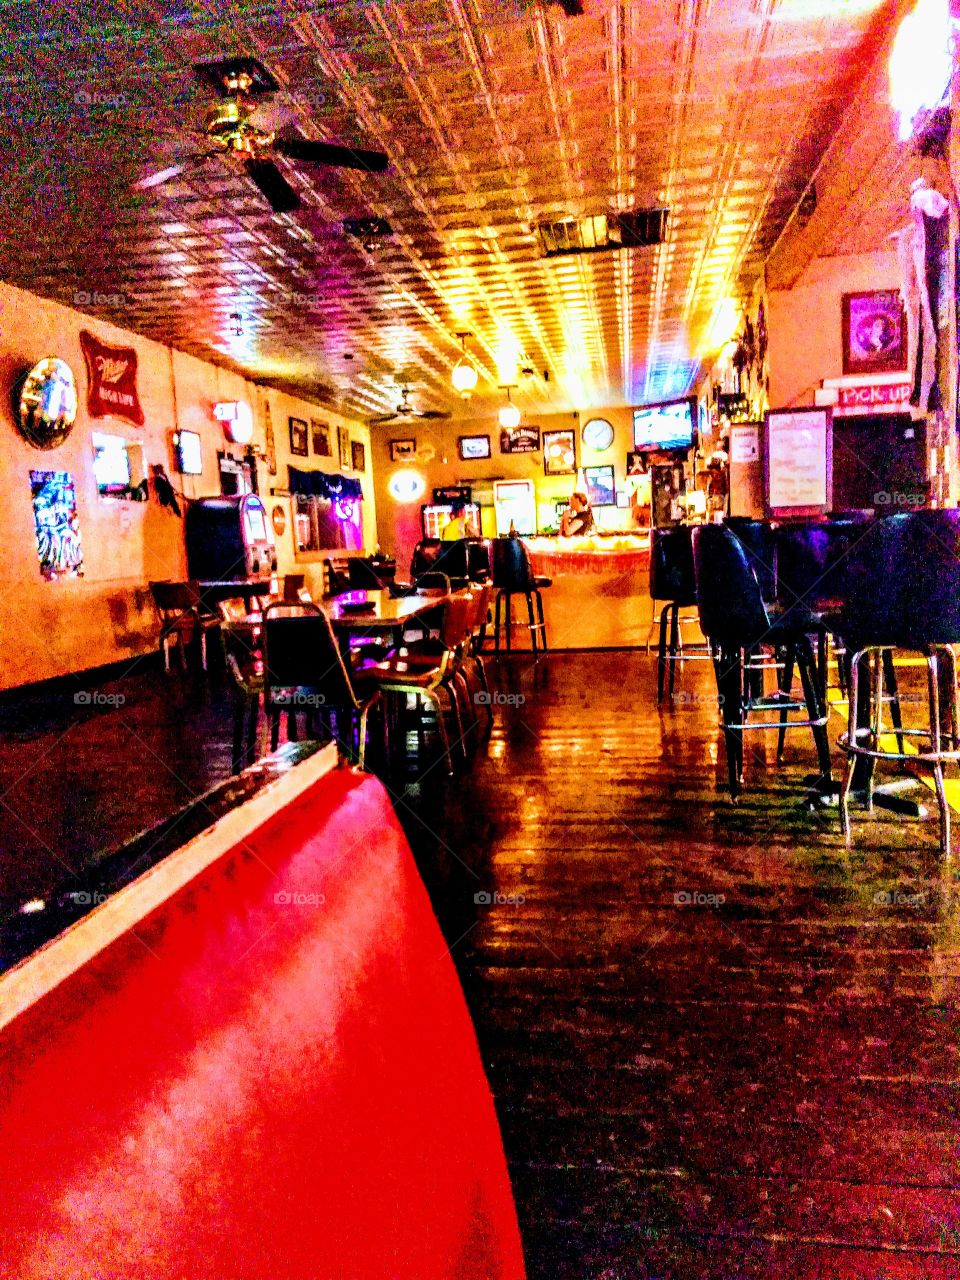 Small town bar and restaurant.